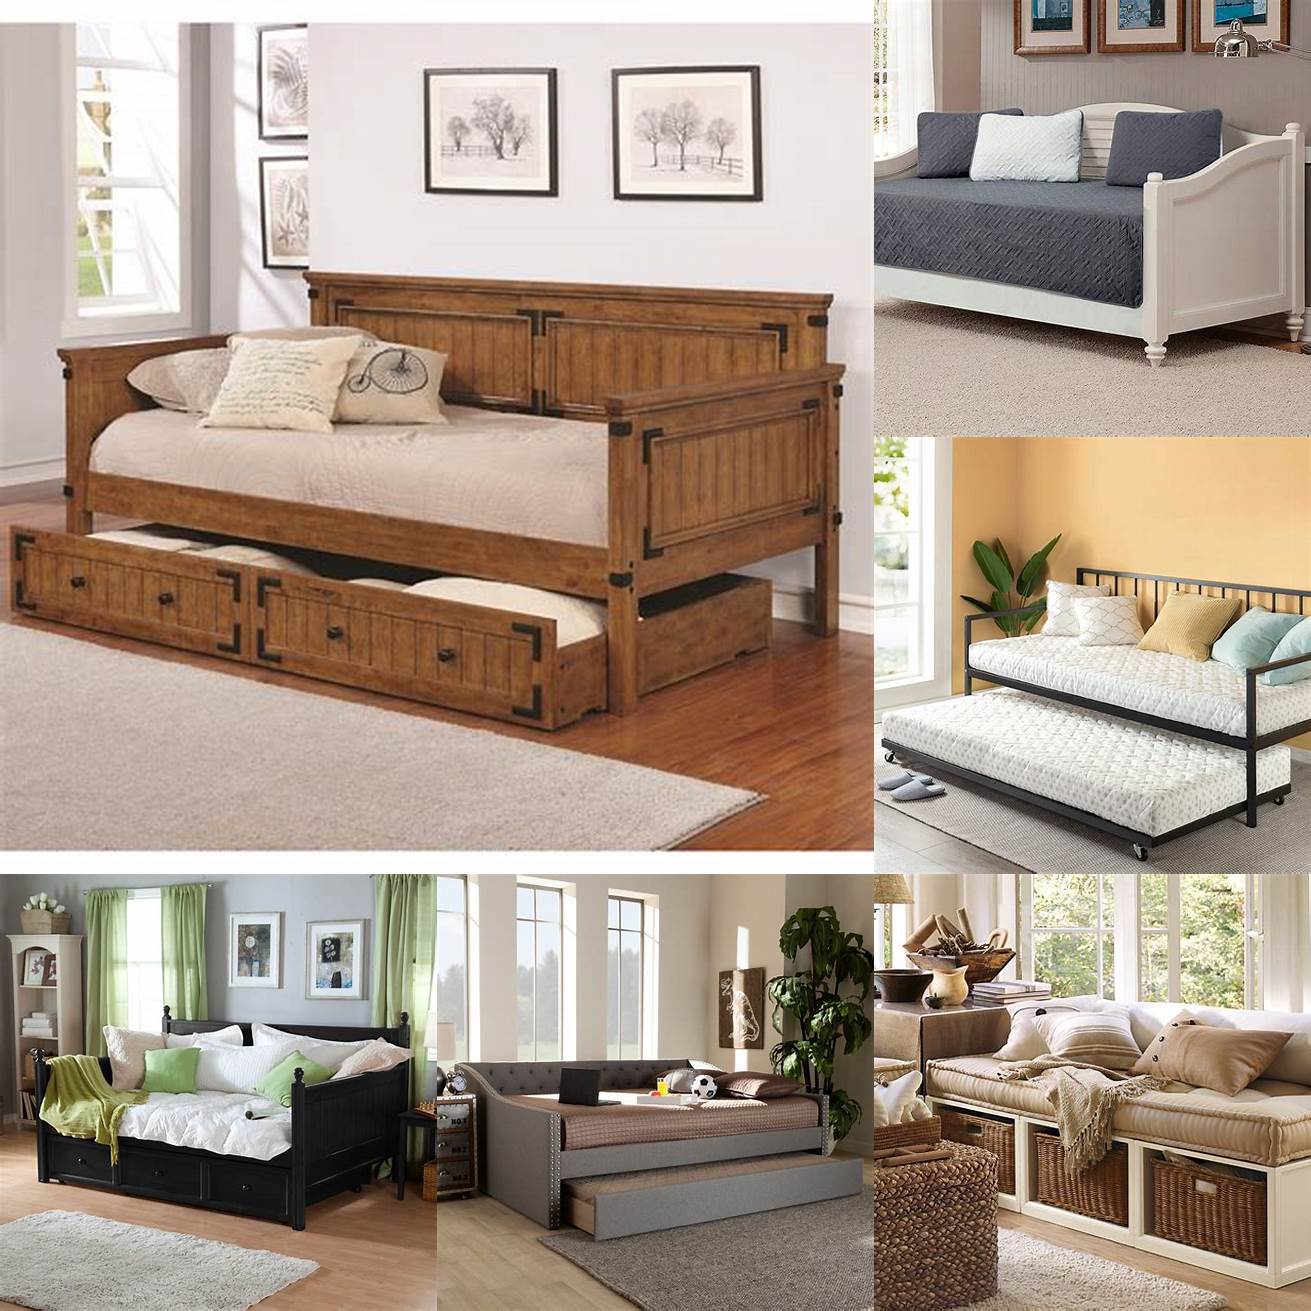 Great for guests Full day beds are a great option for hosting guests